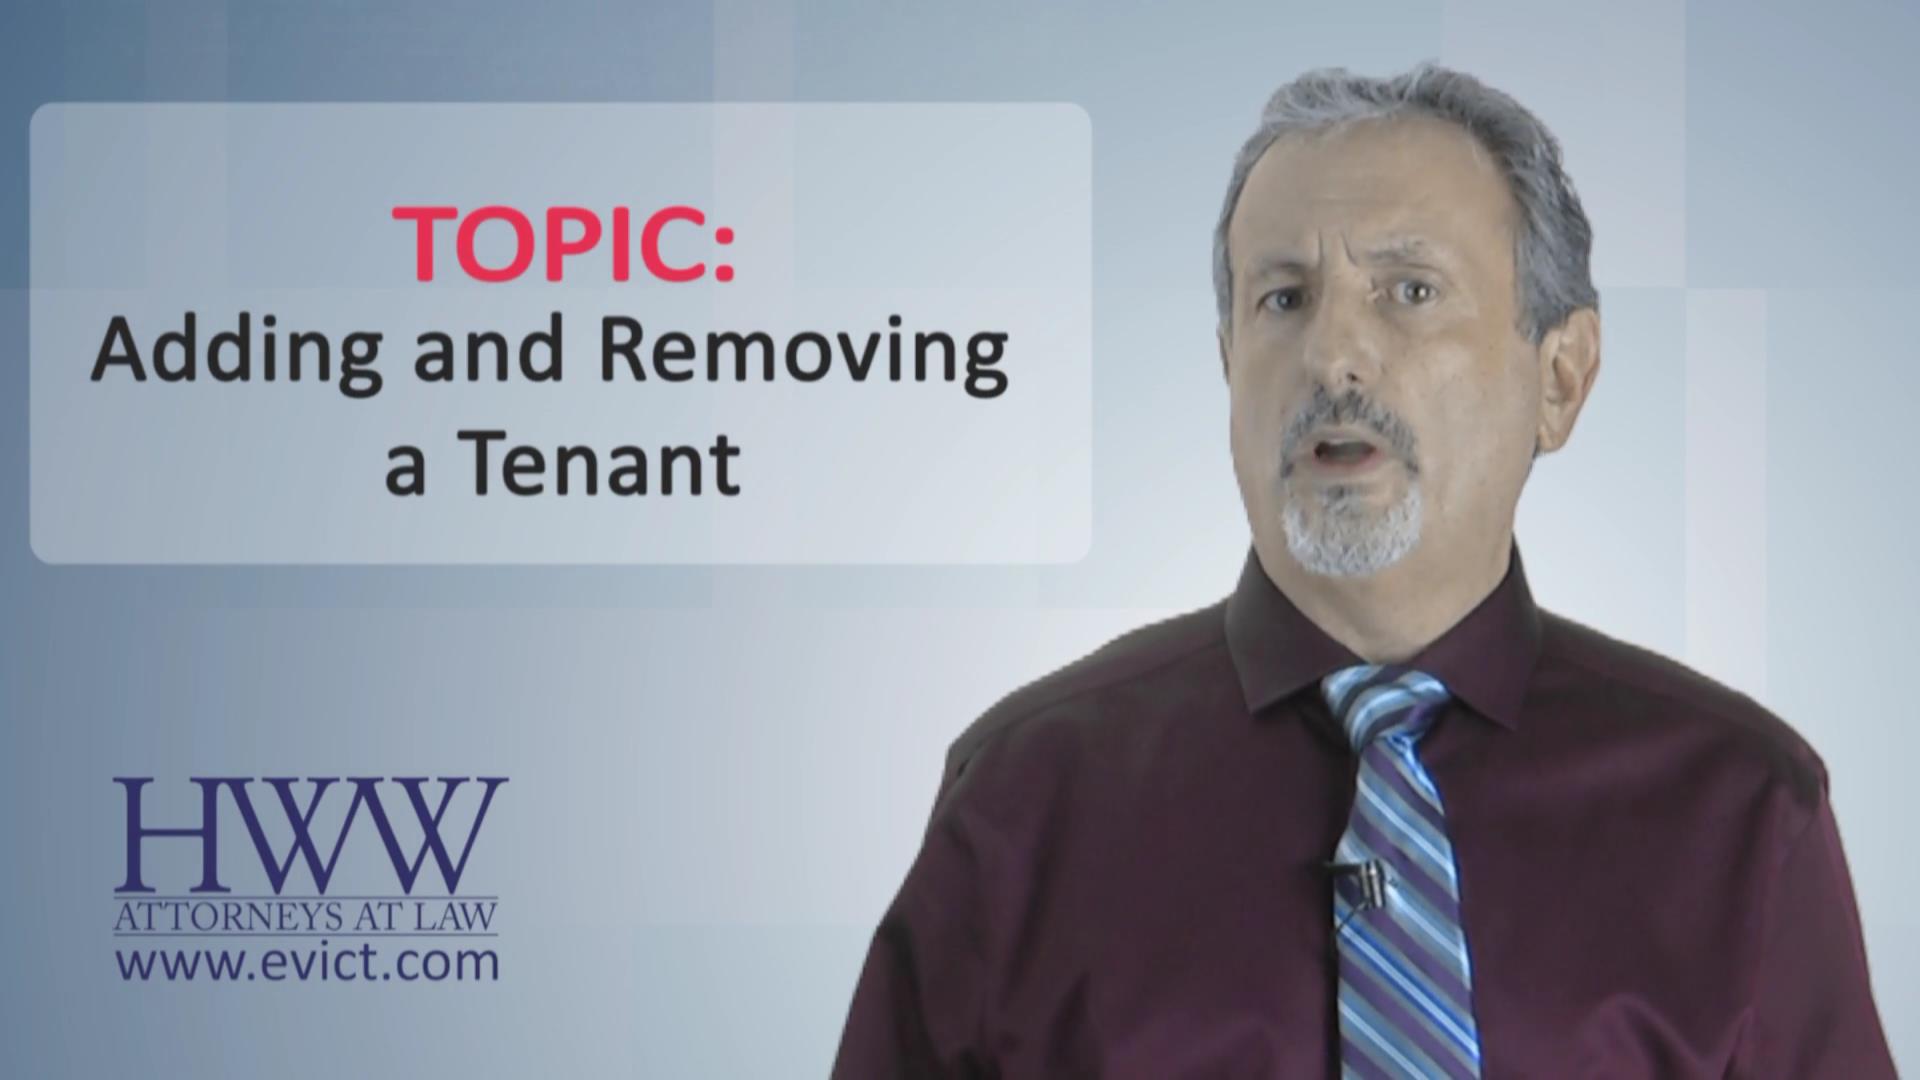 Episode 3: Adding and Removing a Tenant